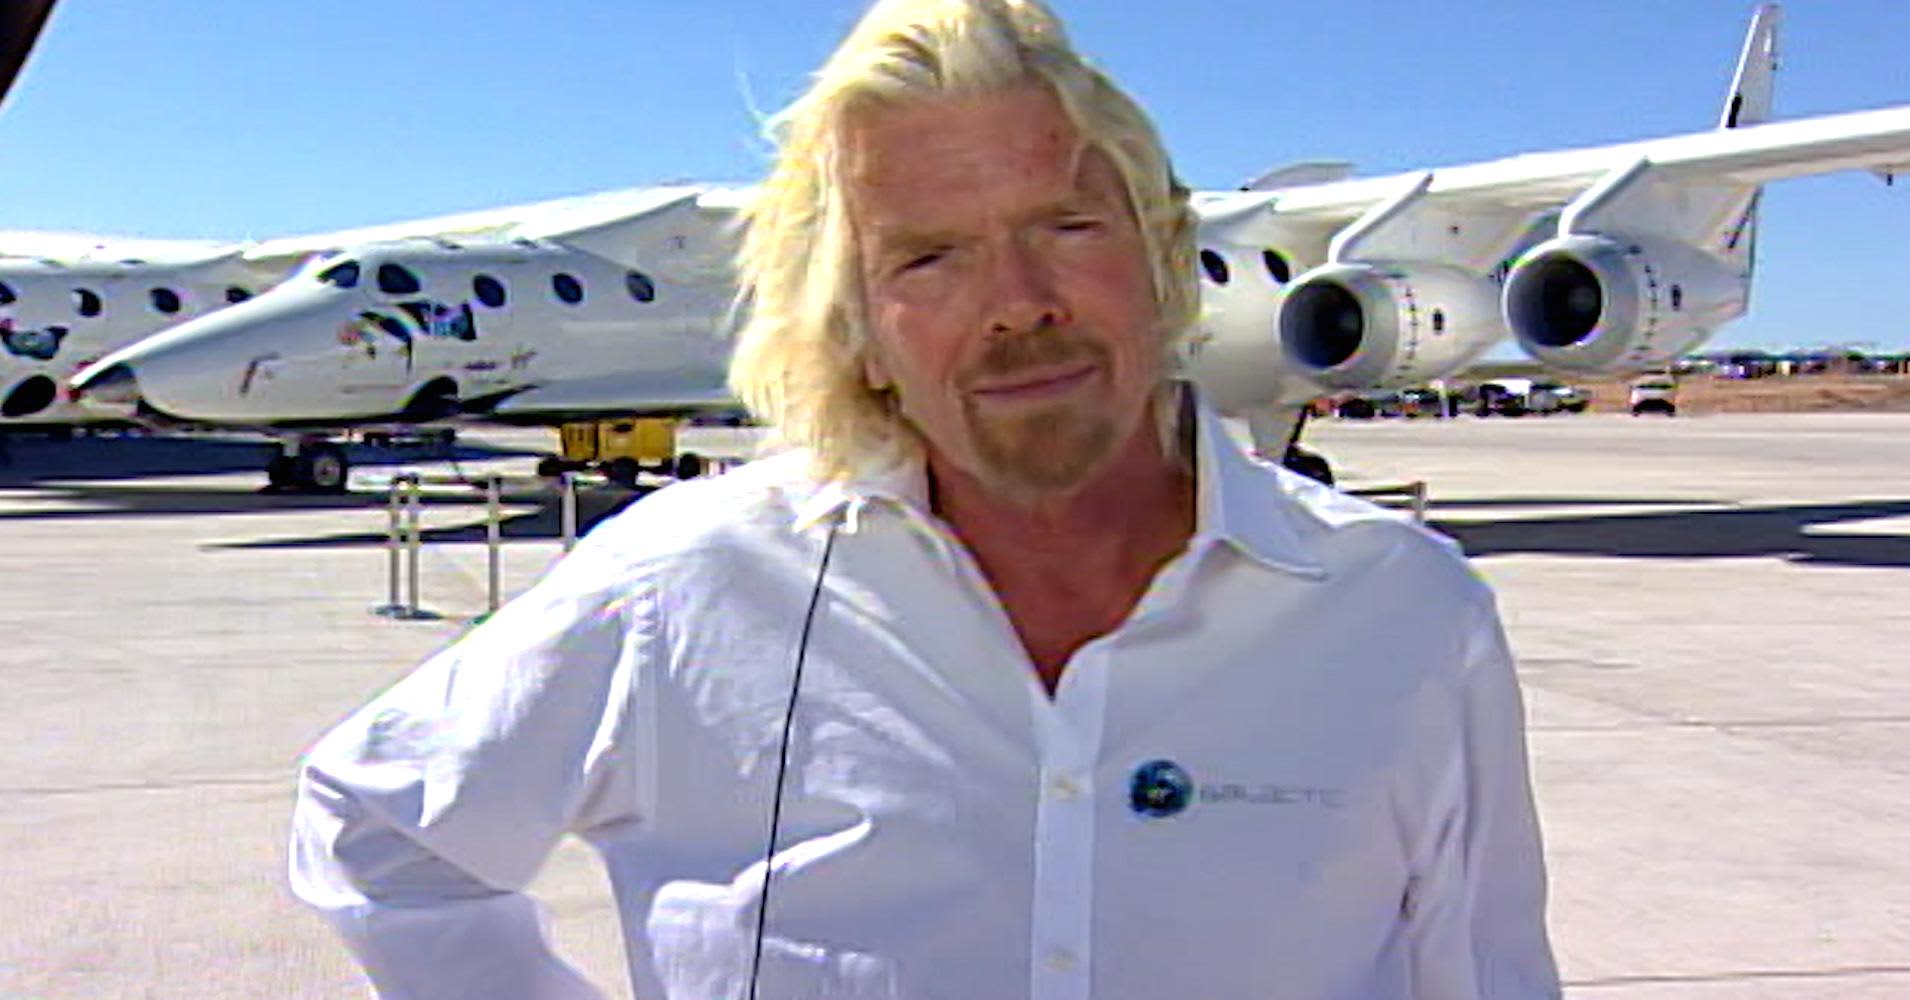 Billionaire Richard Branson learned a key business lesson playing tennis